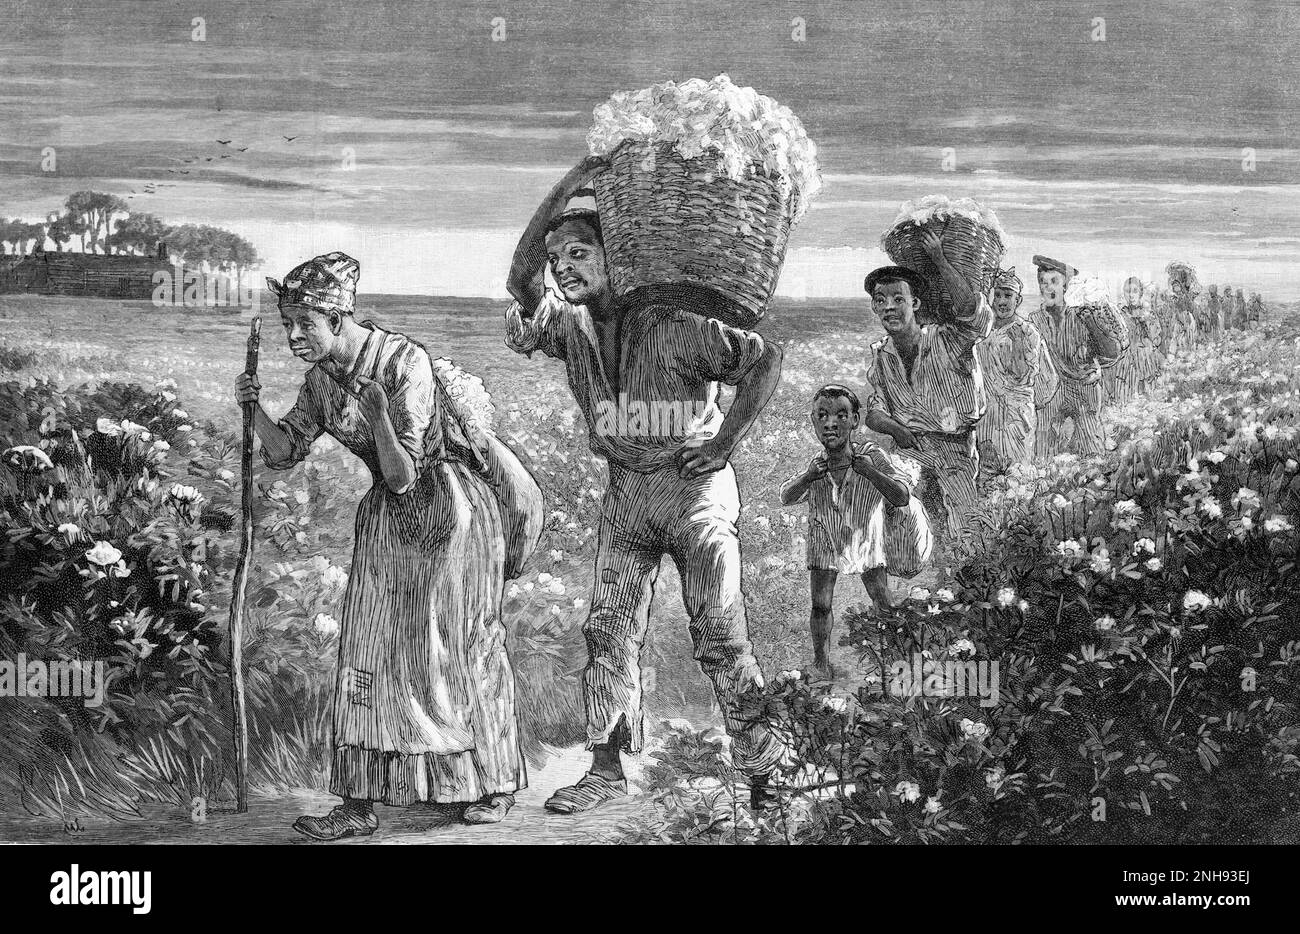 Black laborers bringing cotton in from the field in Alabama, 1880s. Illustration by Matthew Somerville Morgan (1839-1890), 1887. Stock Photo